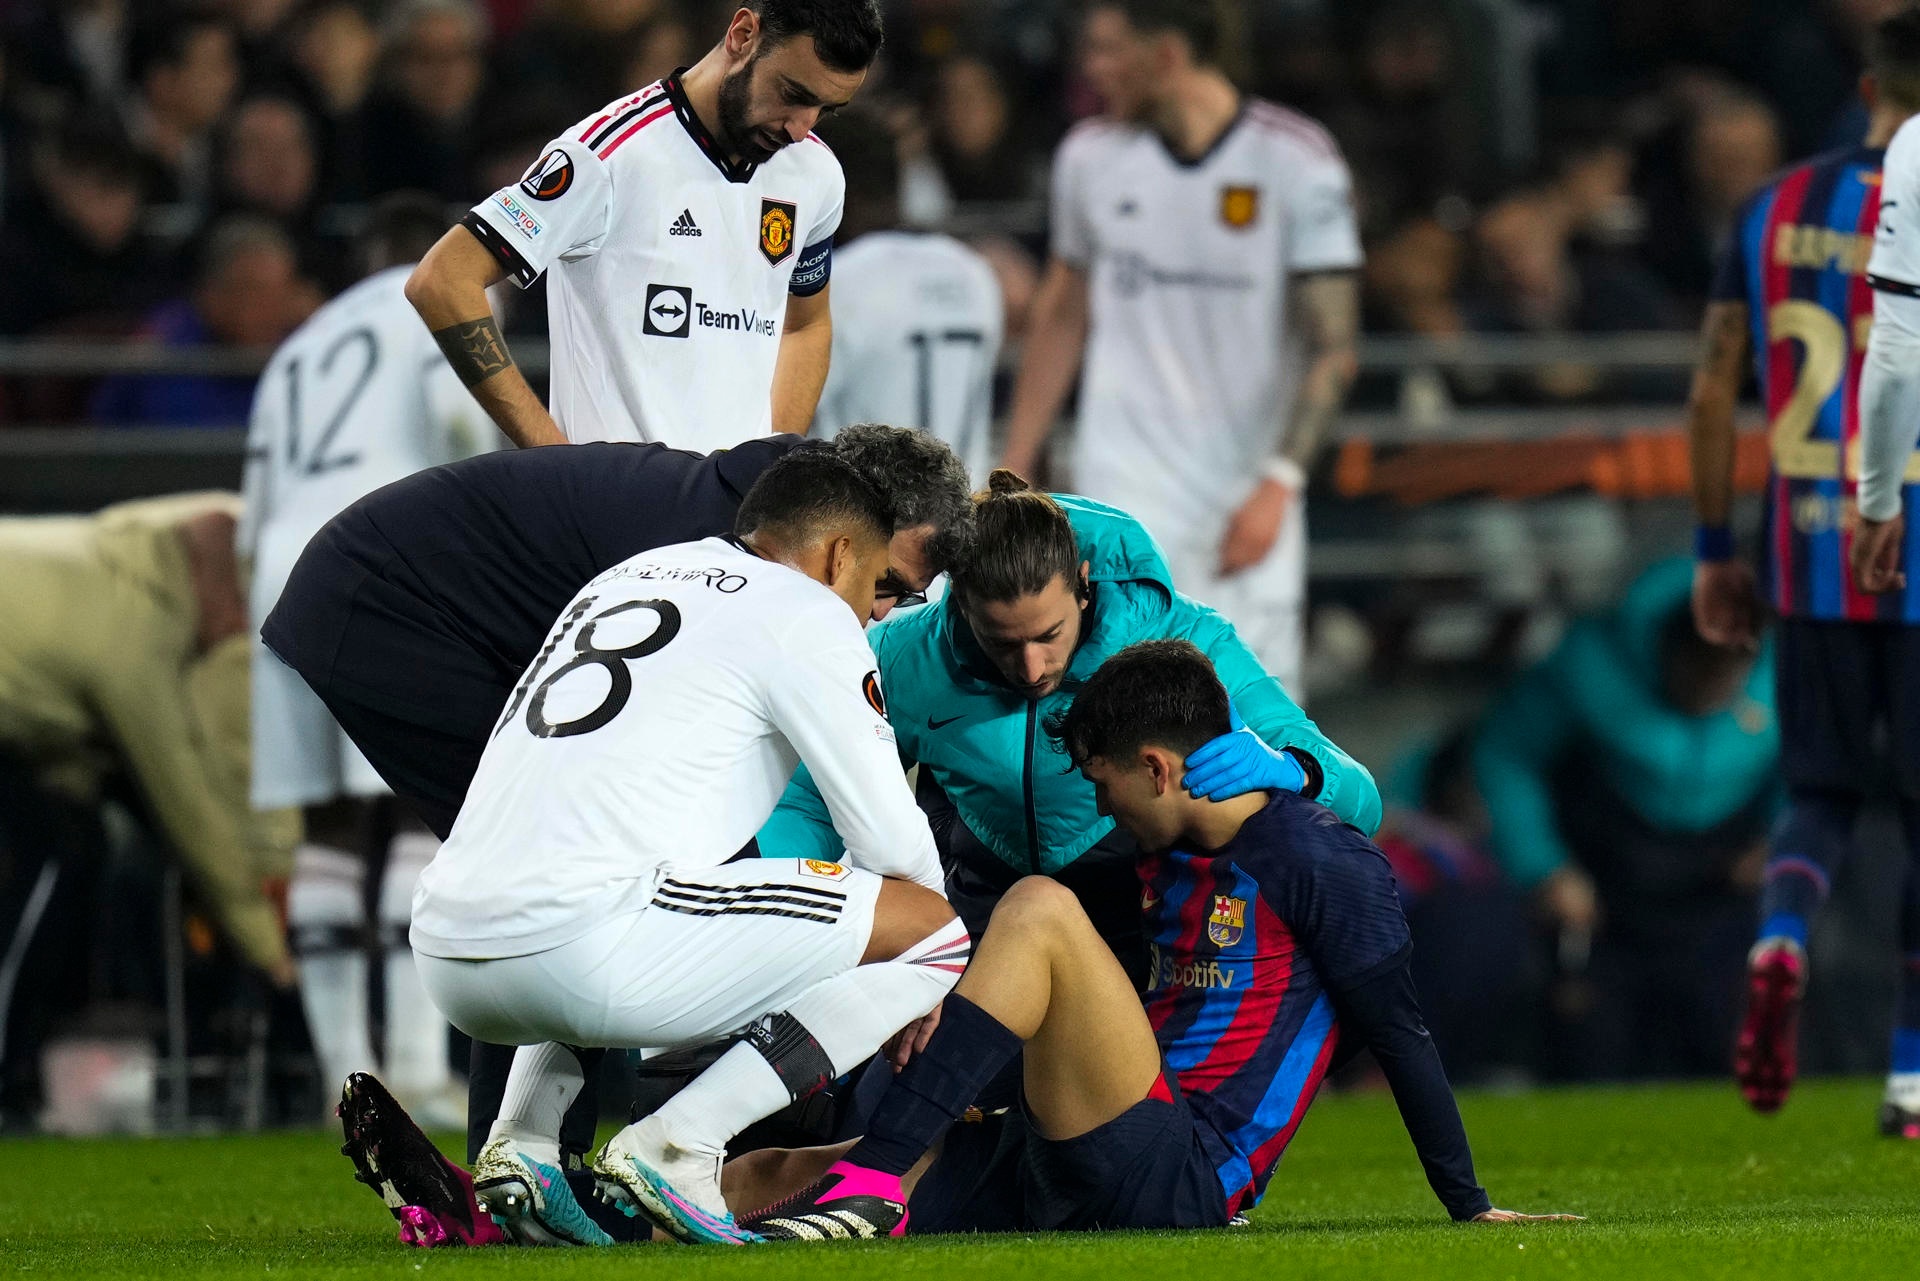 Barca's Pedri could be out of action for three weeks